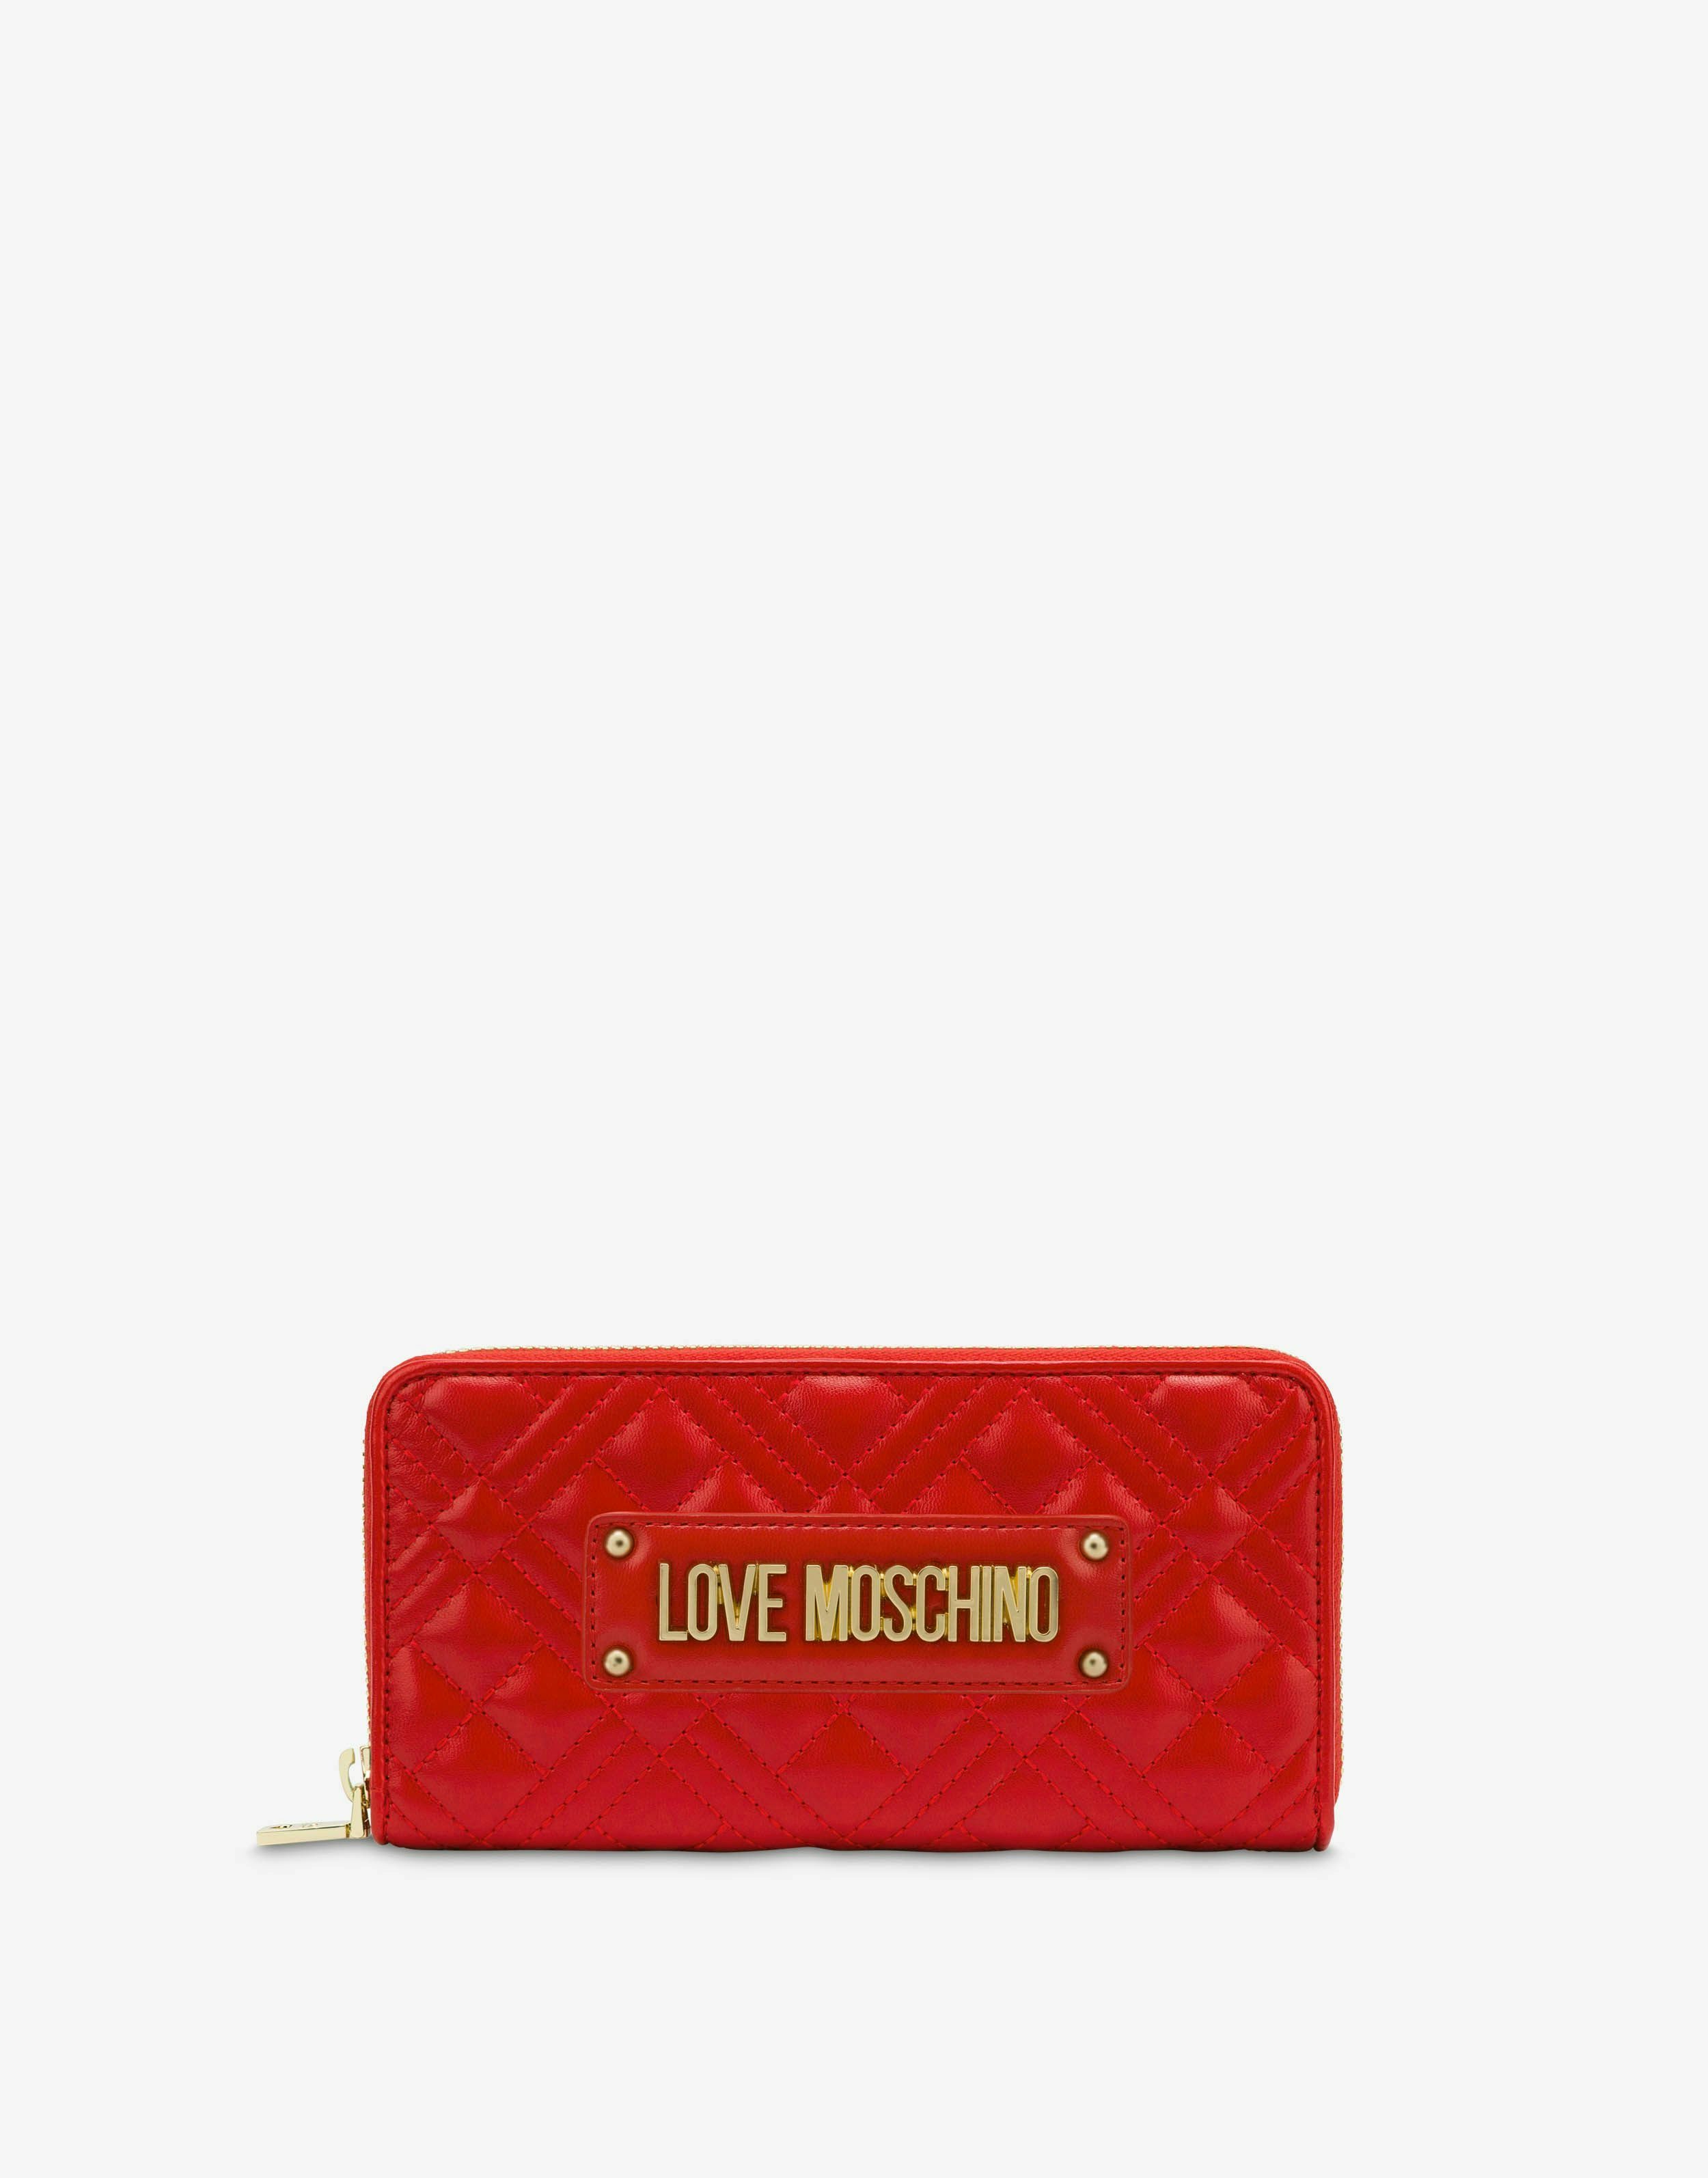 Wallet with logo | Moschino Official Store